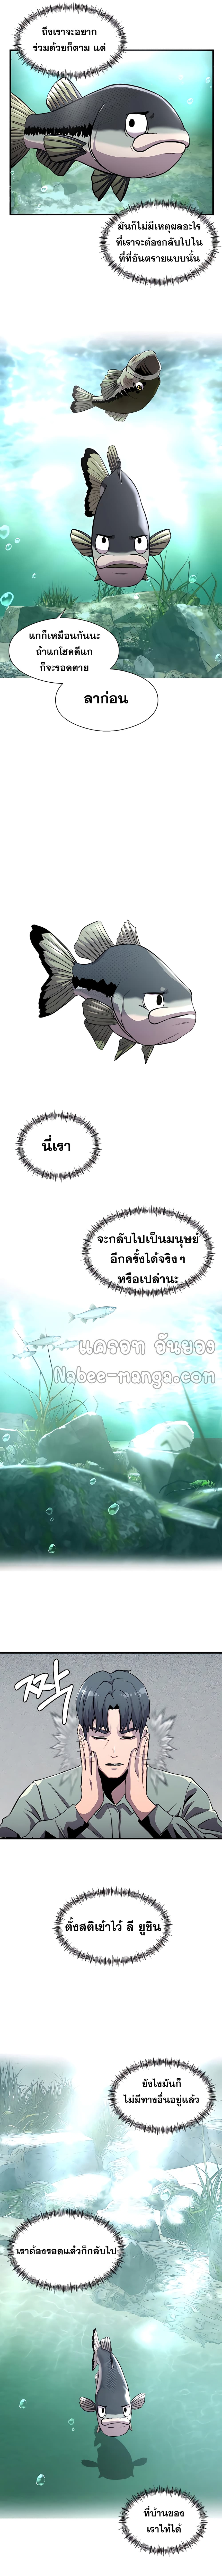 Surviving As a Fish - หน้า 15